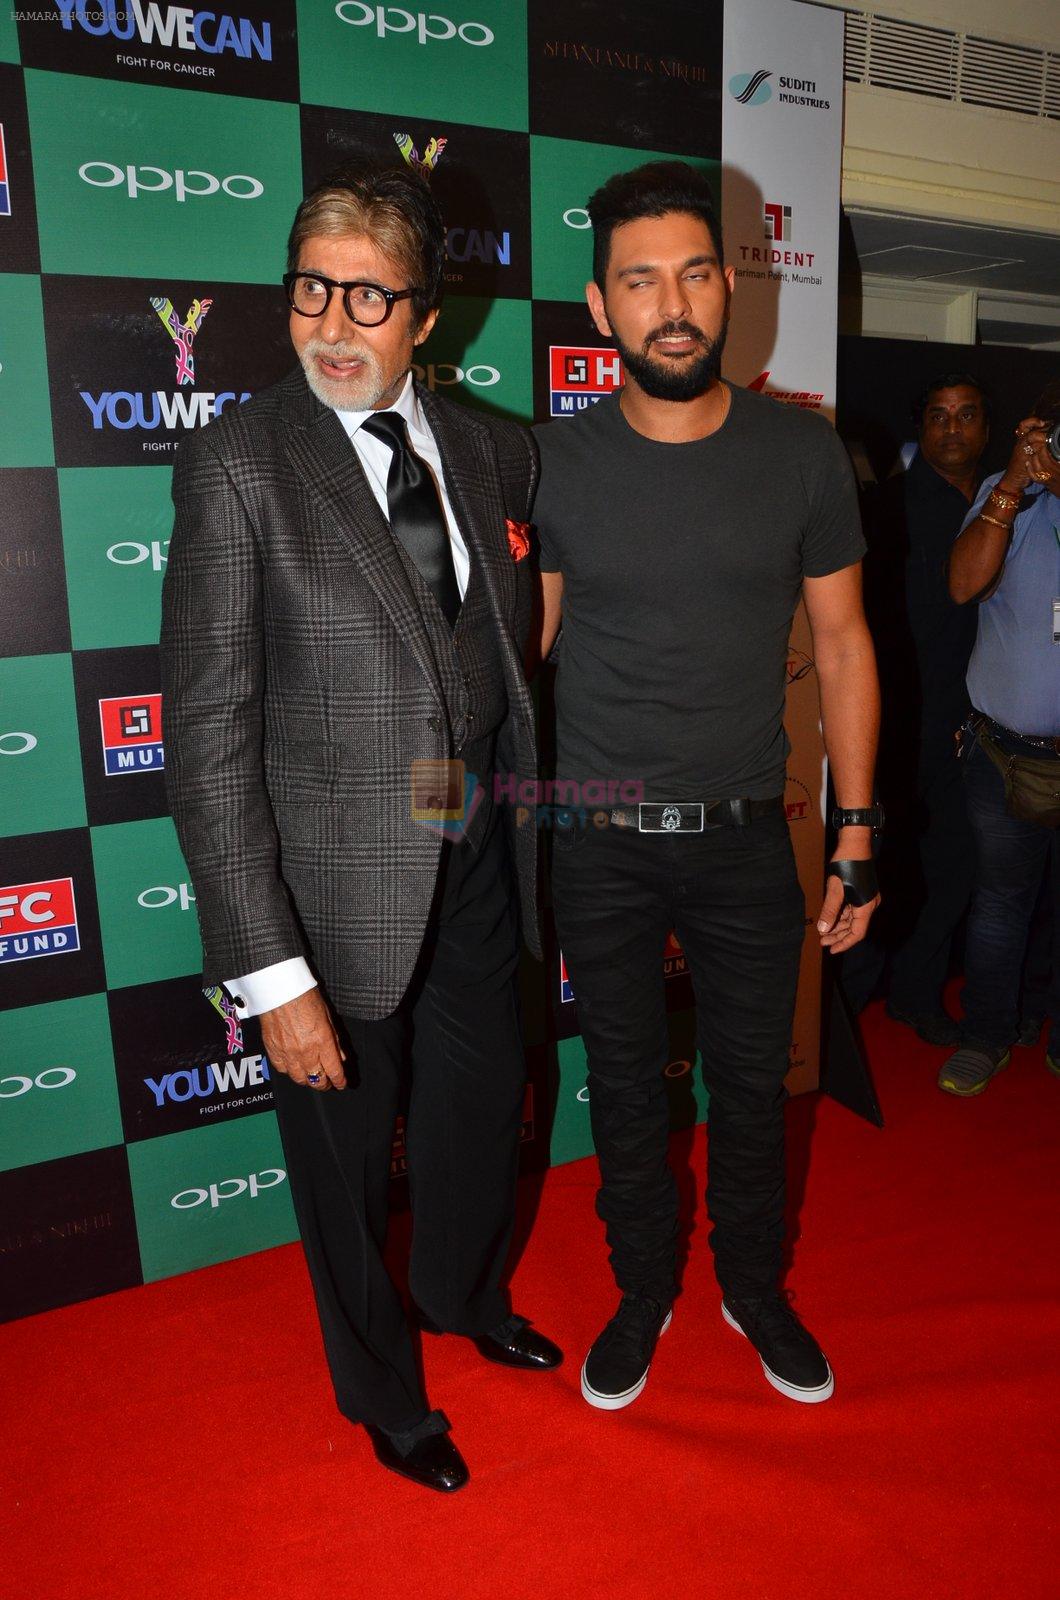 Amitabh Bachchan, Yuvraj Singh at You We Can Label launch with Shantanu Nikhil collection on 3rd Sept 2016